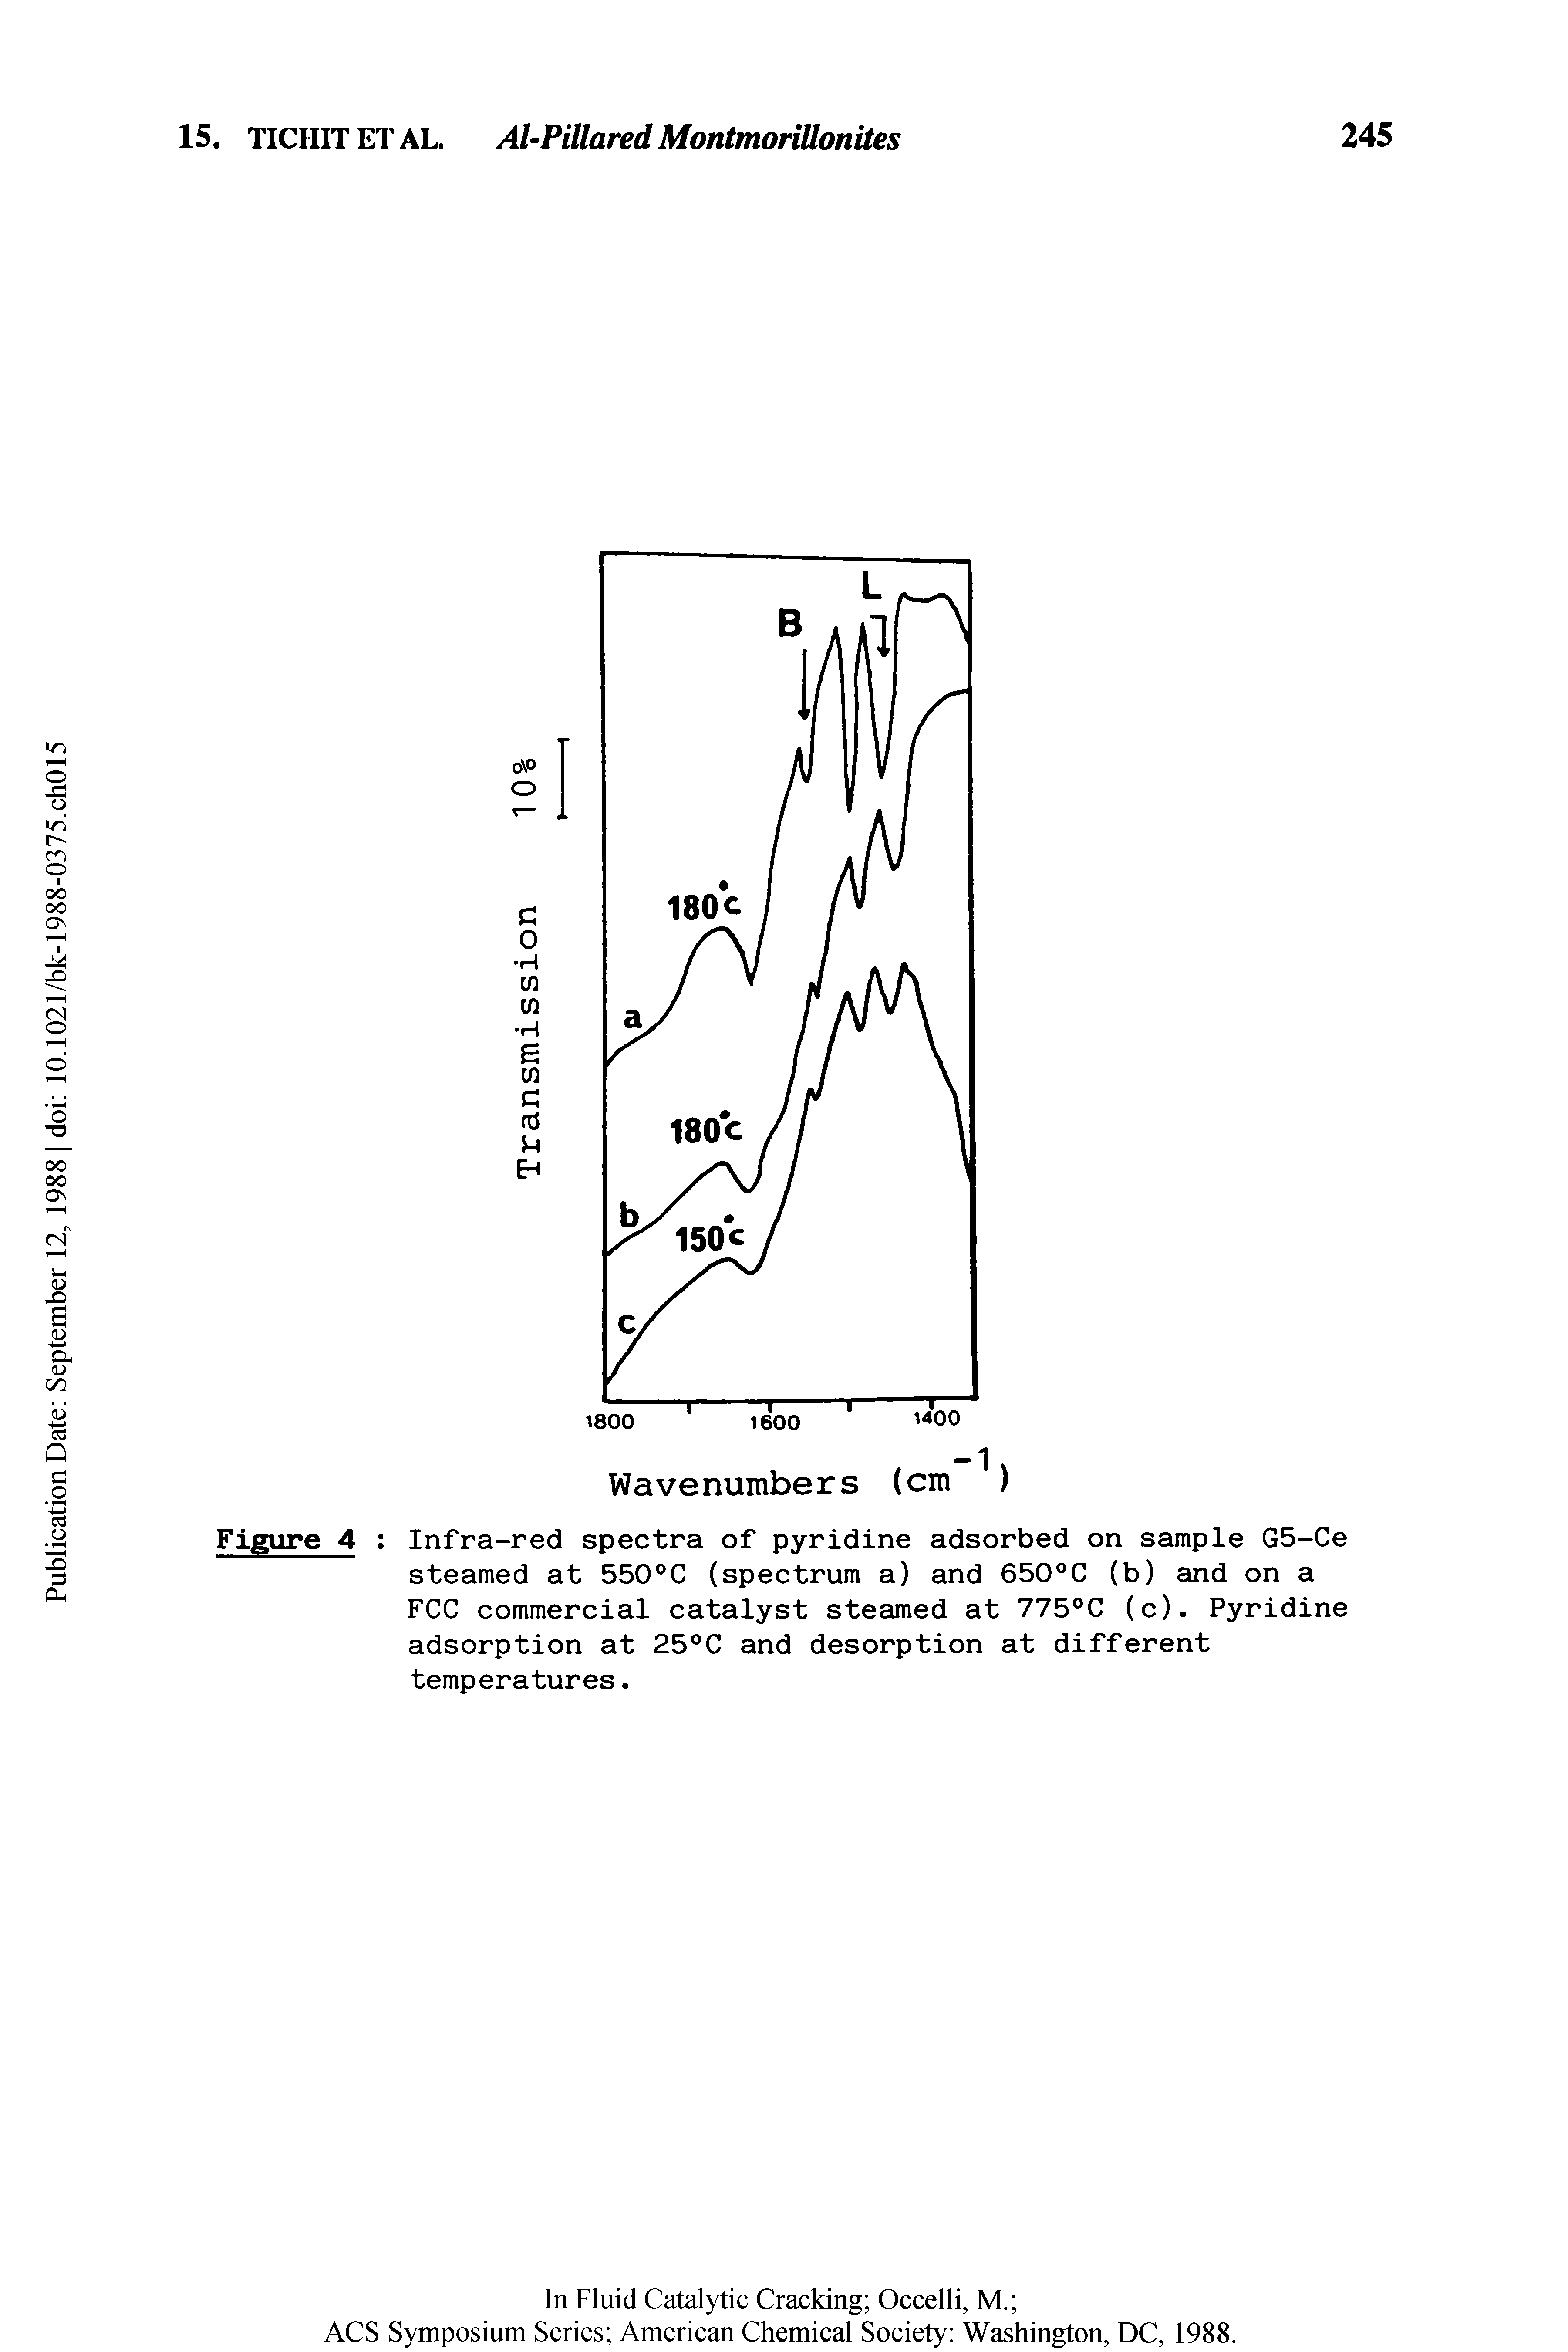 Figure 4 Infra-red spectra of pyridine adsorbed on sample G5-Ce steamed at 550°C (spectrum a) and 650°C (b) and on a FCC commercial catalyst steamed at 775°C (c). Pyridine adsorption at 25°C and desorption at different temperatures.